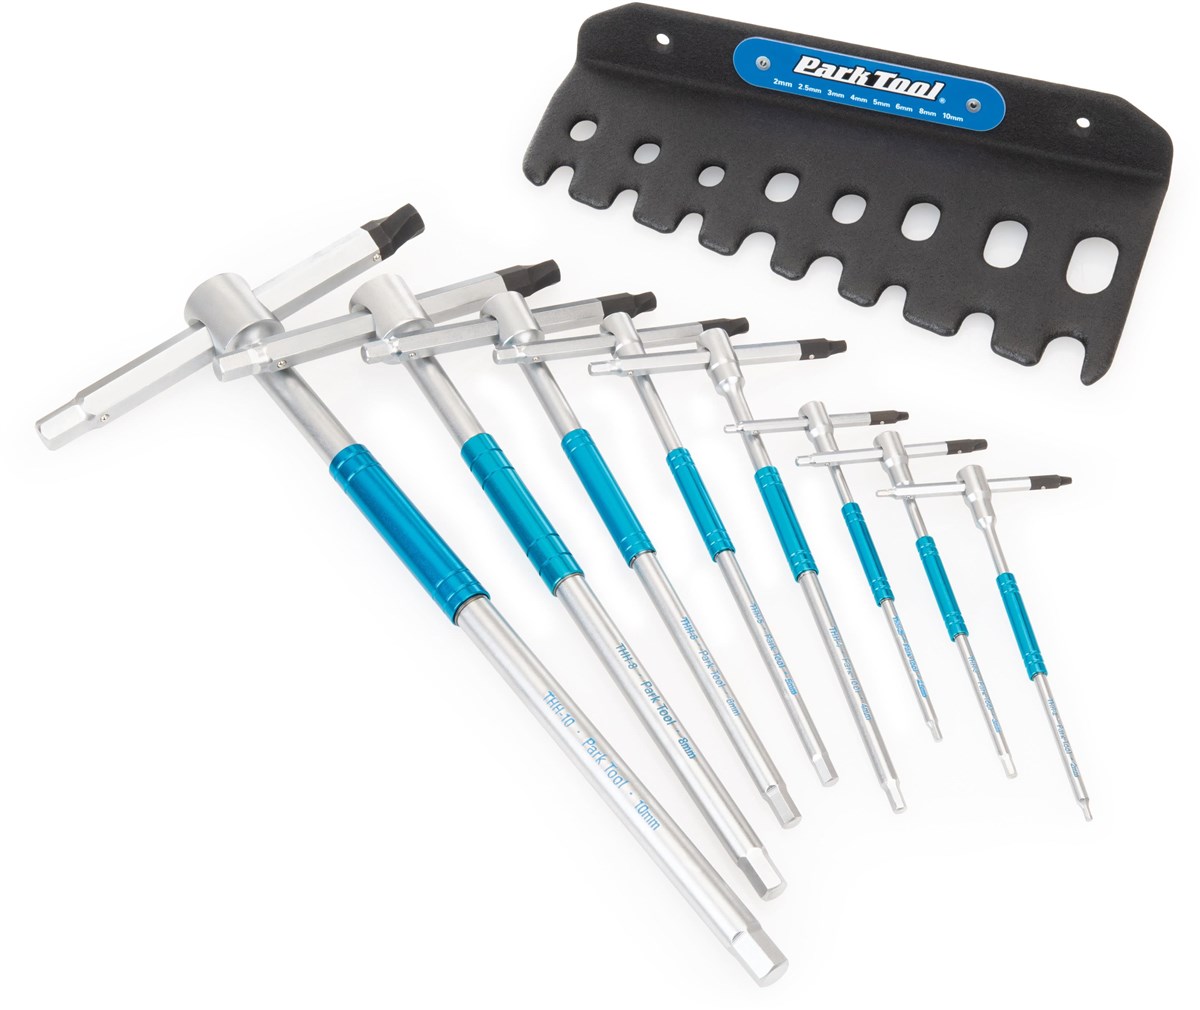 Park Tool THH-1 - Sliding T-Handle Hex Wrench Set product image